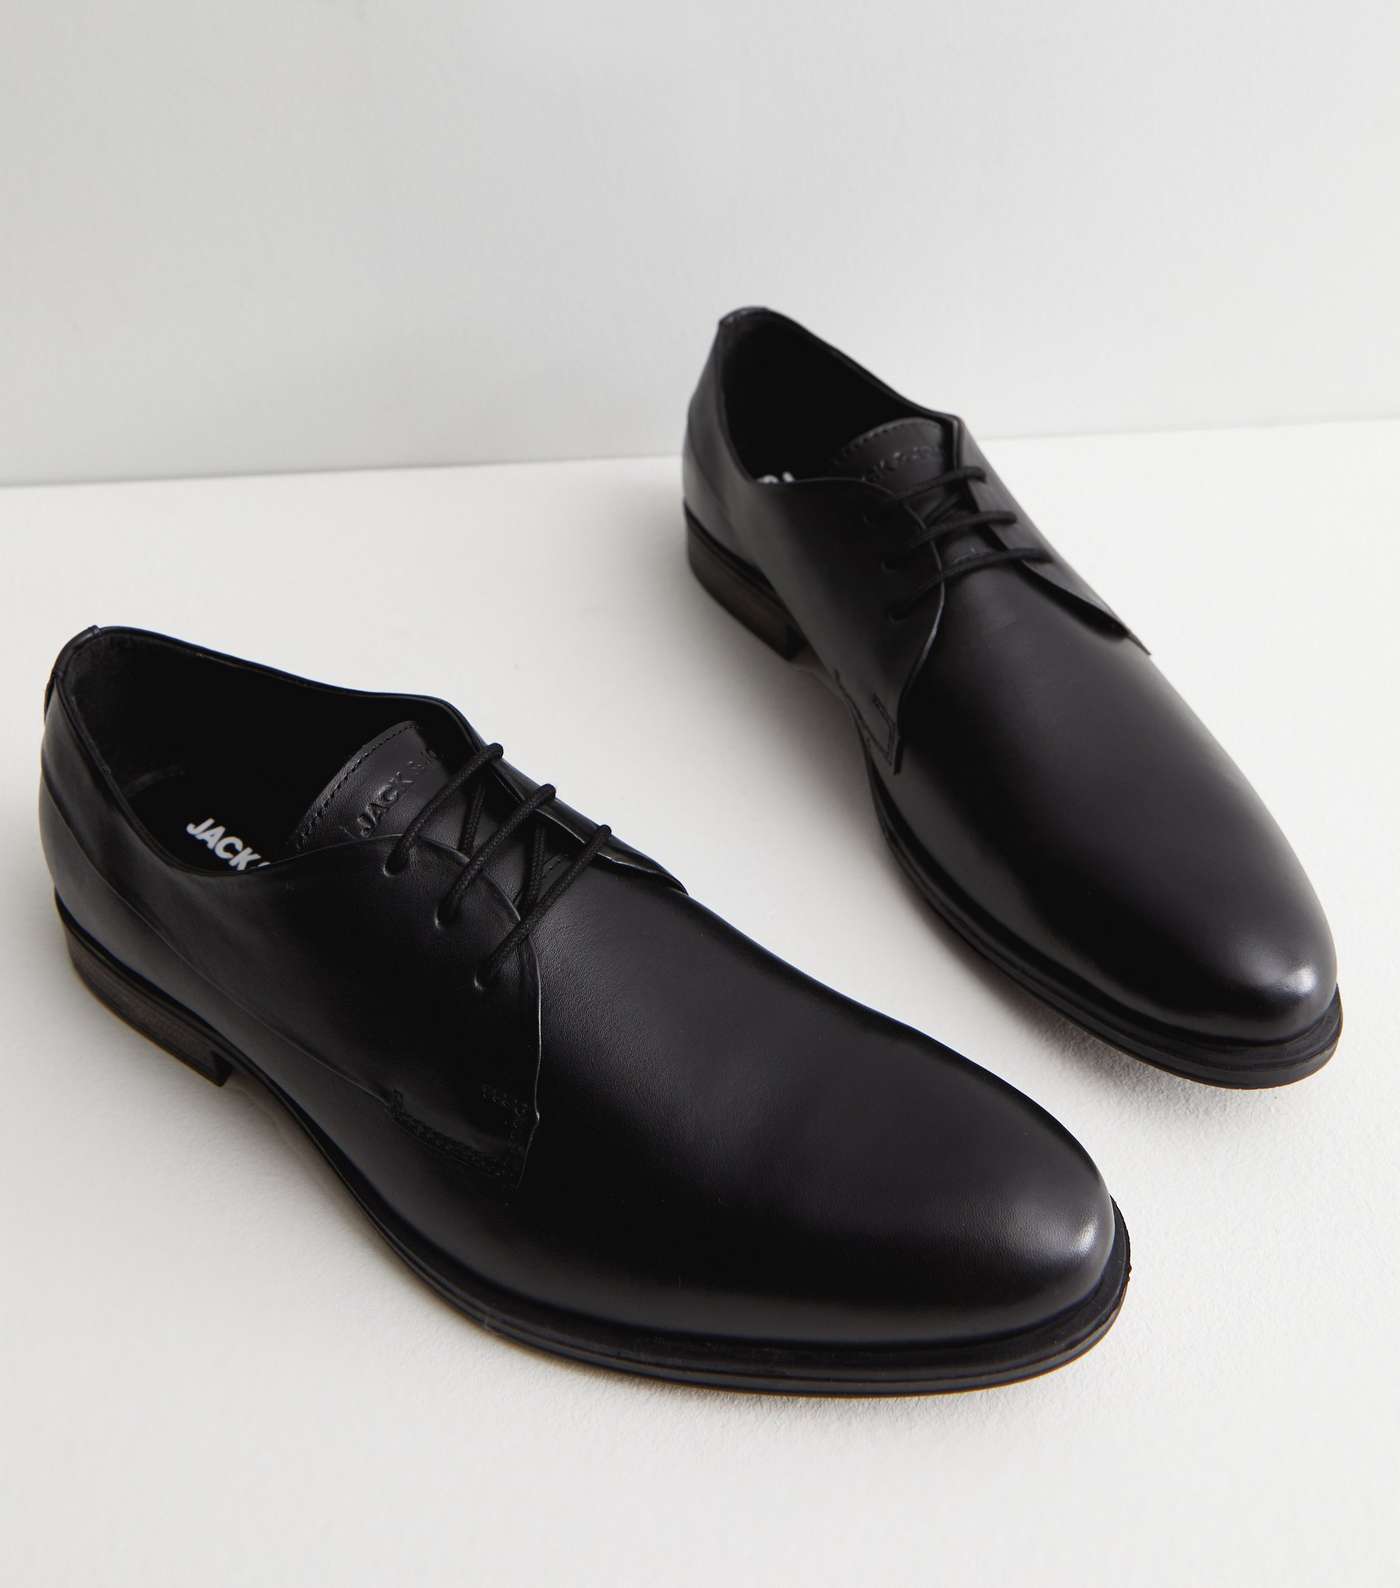 Jack & Jones Dark Grey Leather Rounded Oxford Shoes